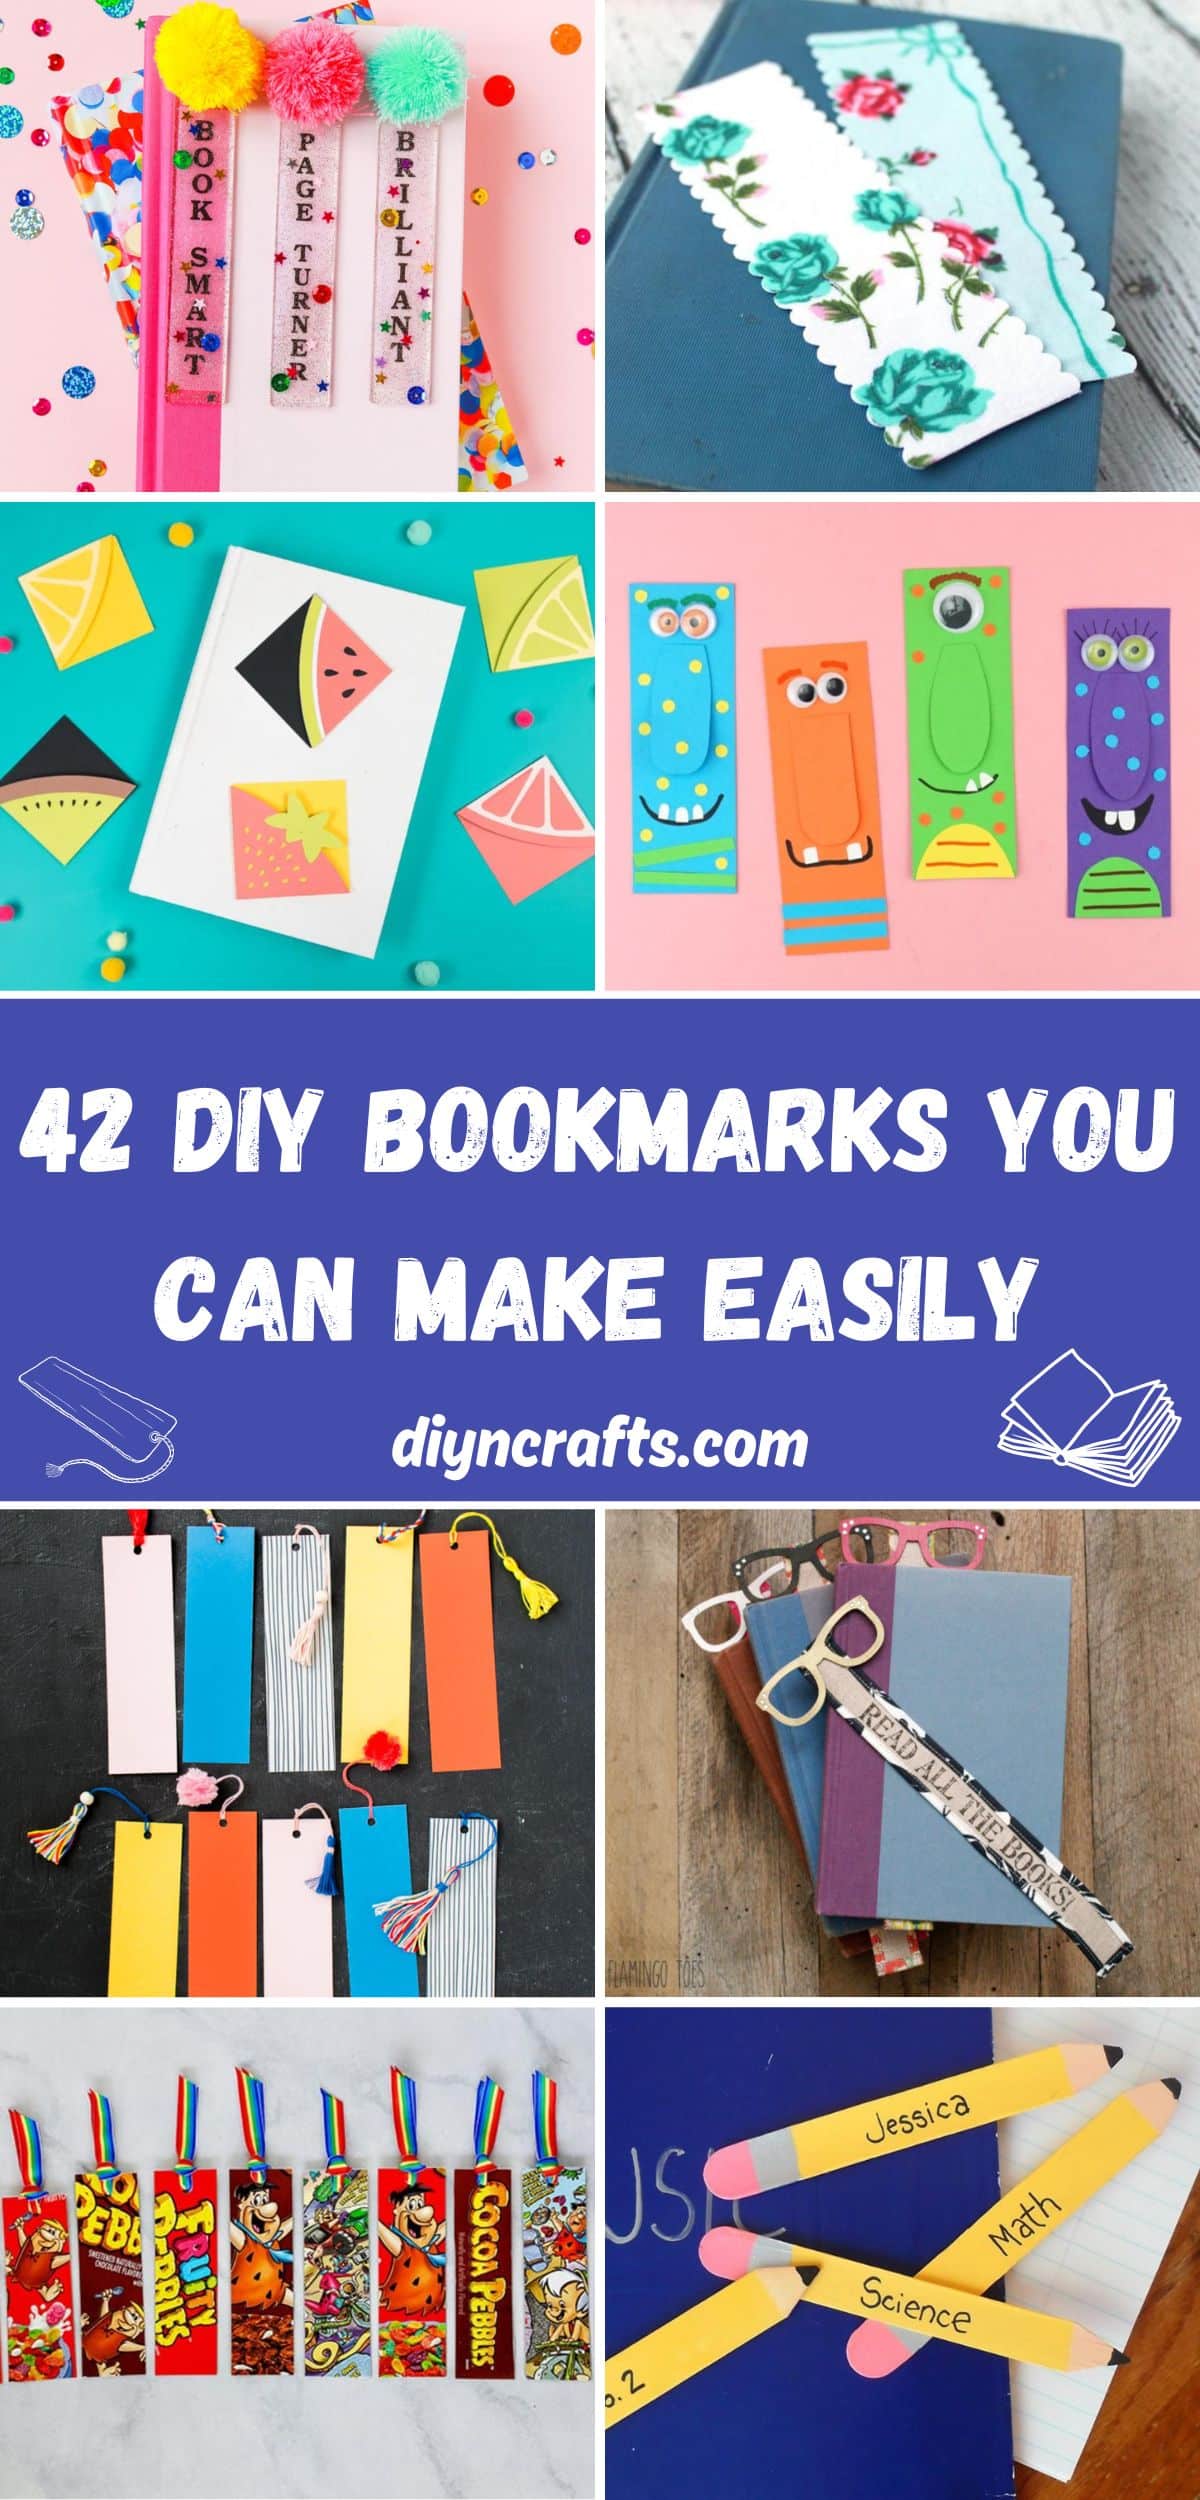 42 DIY Bookmarks You Can Make Easily collage.